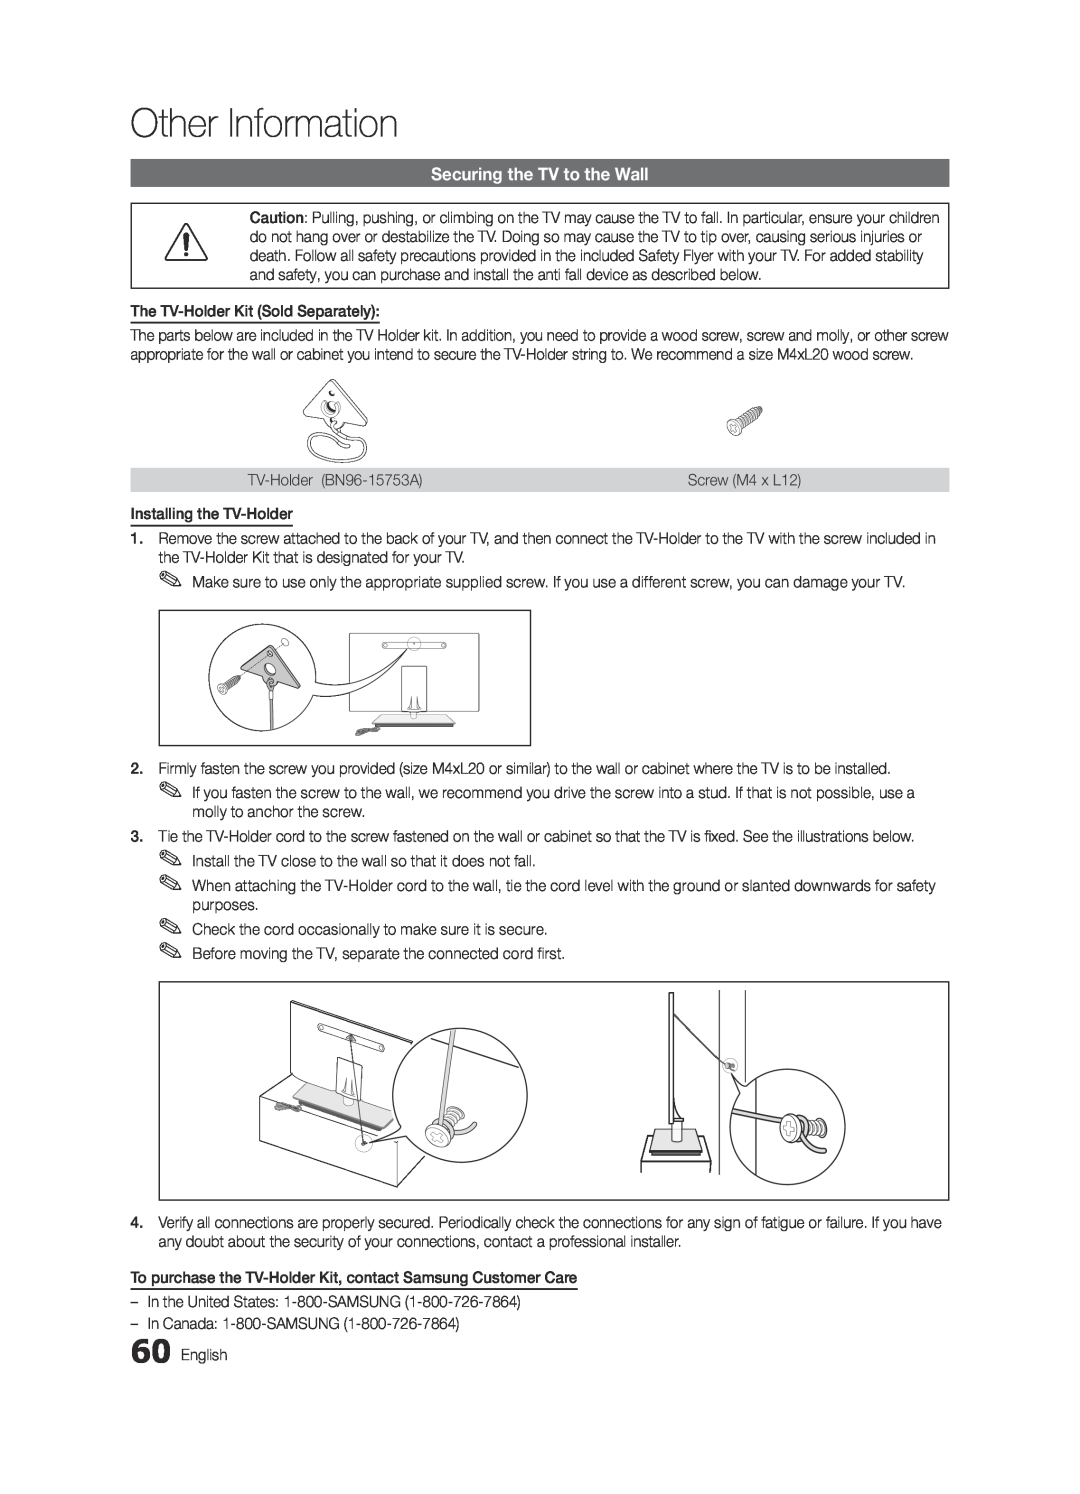 Samsung BN68-03088A-01, Series C9 user manual Securing the TV to the Wall, Other Information 